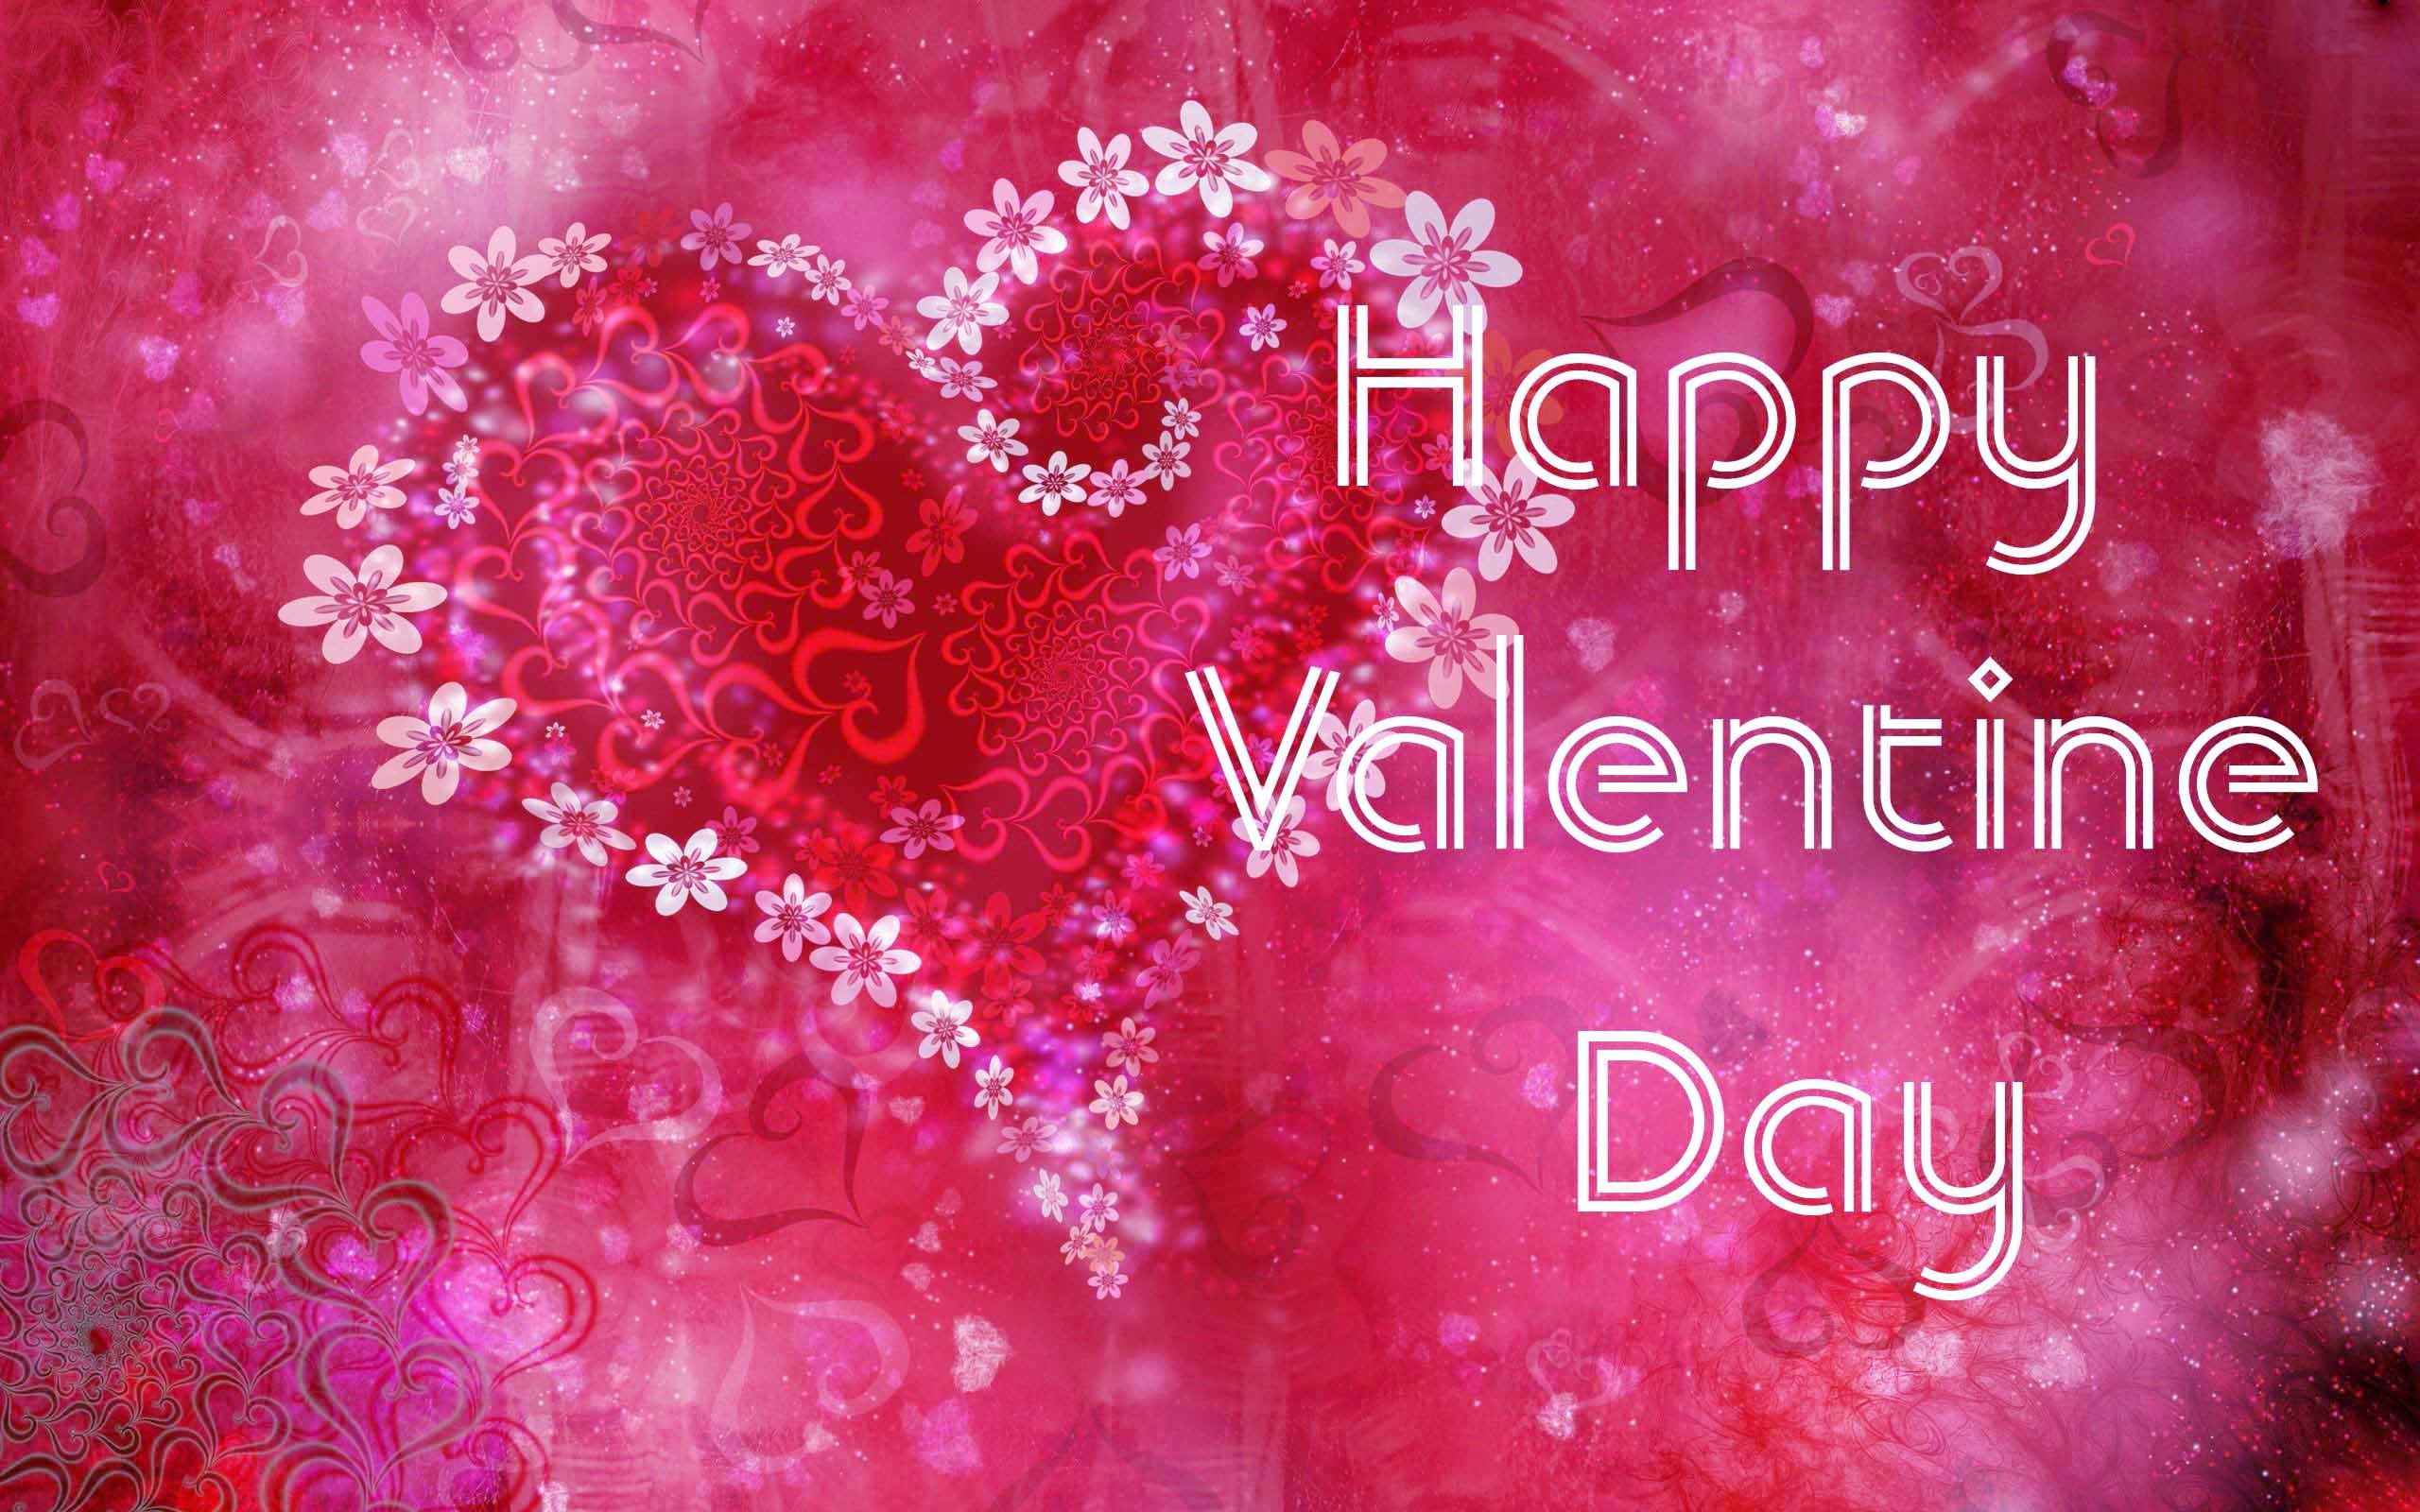 happy valentine day wallpaper hd,heart,pink,text,red,love